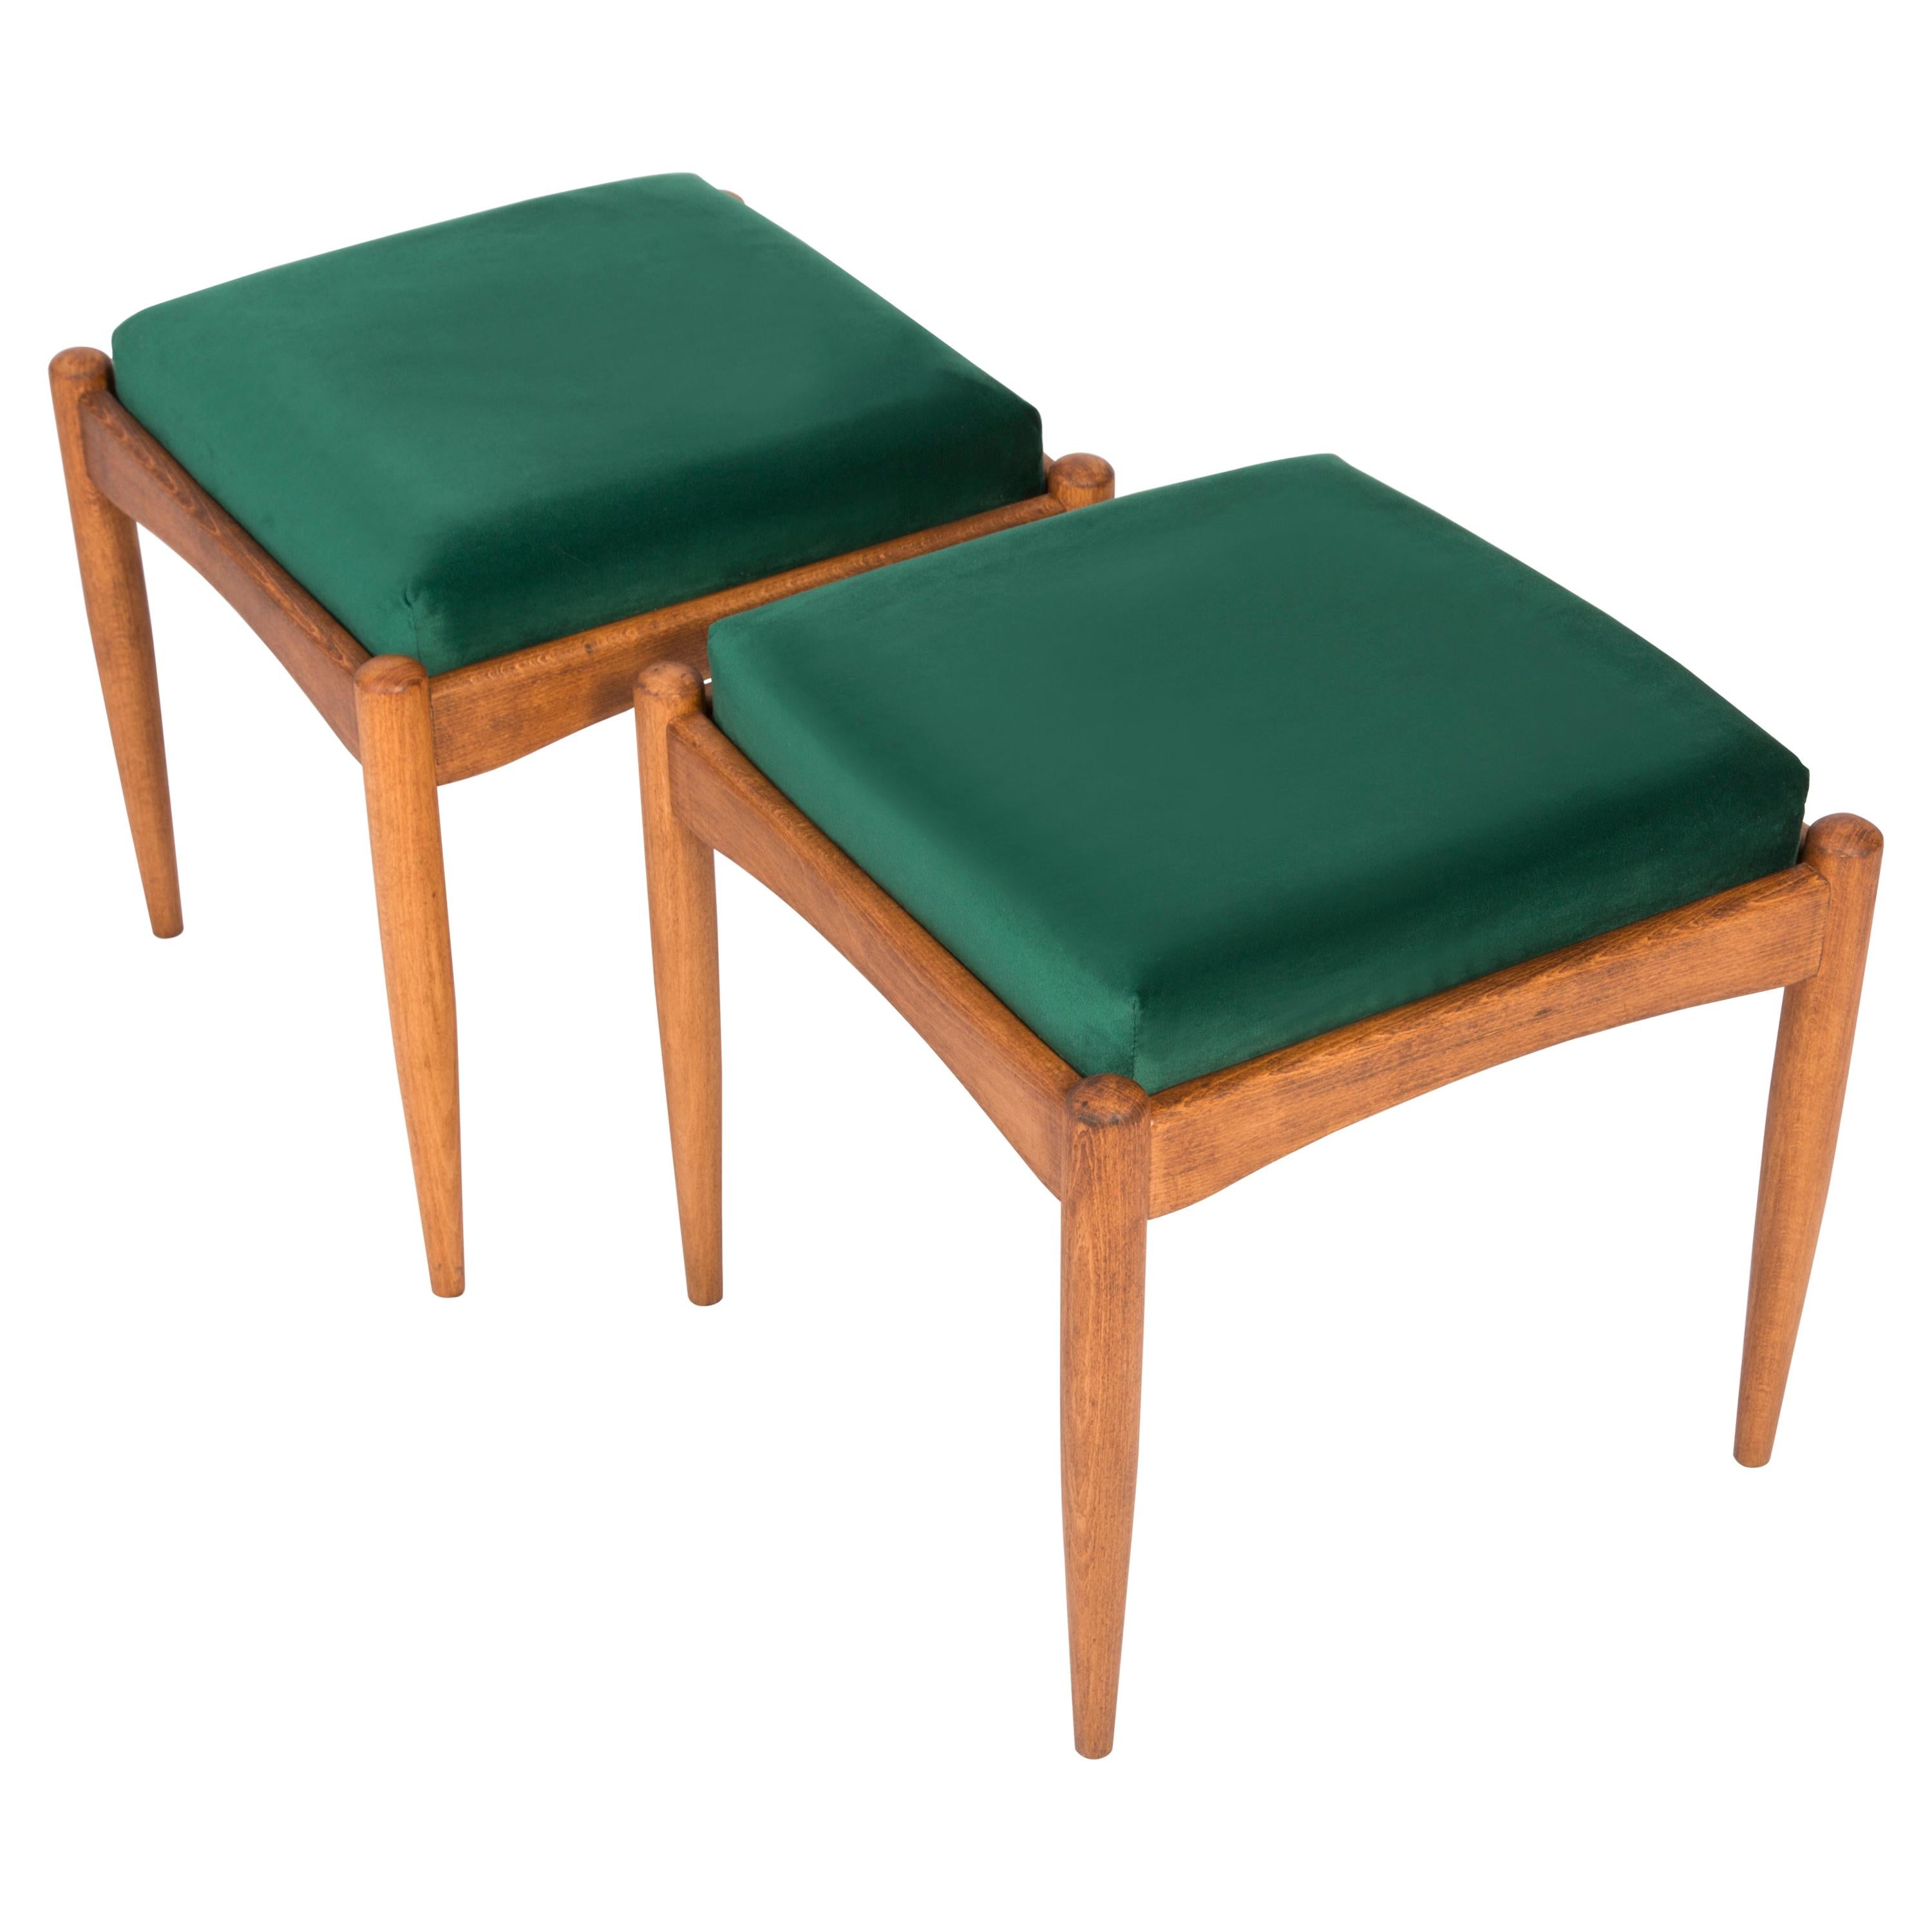 Stools from the turn of the 1960s and 1970s. Beautiful velvet green upholstery. The stools consists of an upholstered part, a seat and wooden legs narrowing downwards, characteristic of the 1960s style. We can prepare this pair also in another color